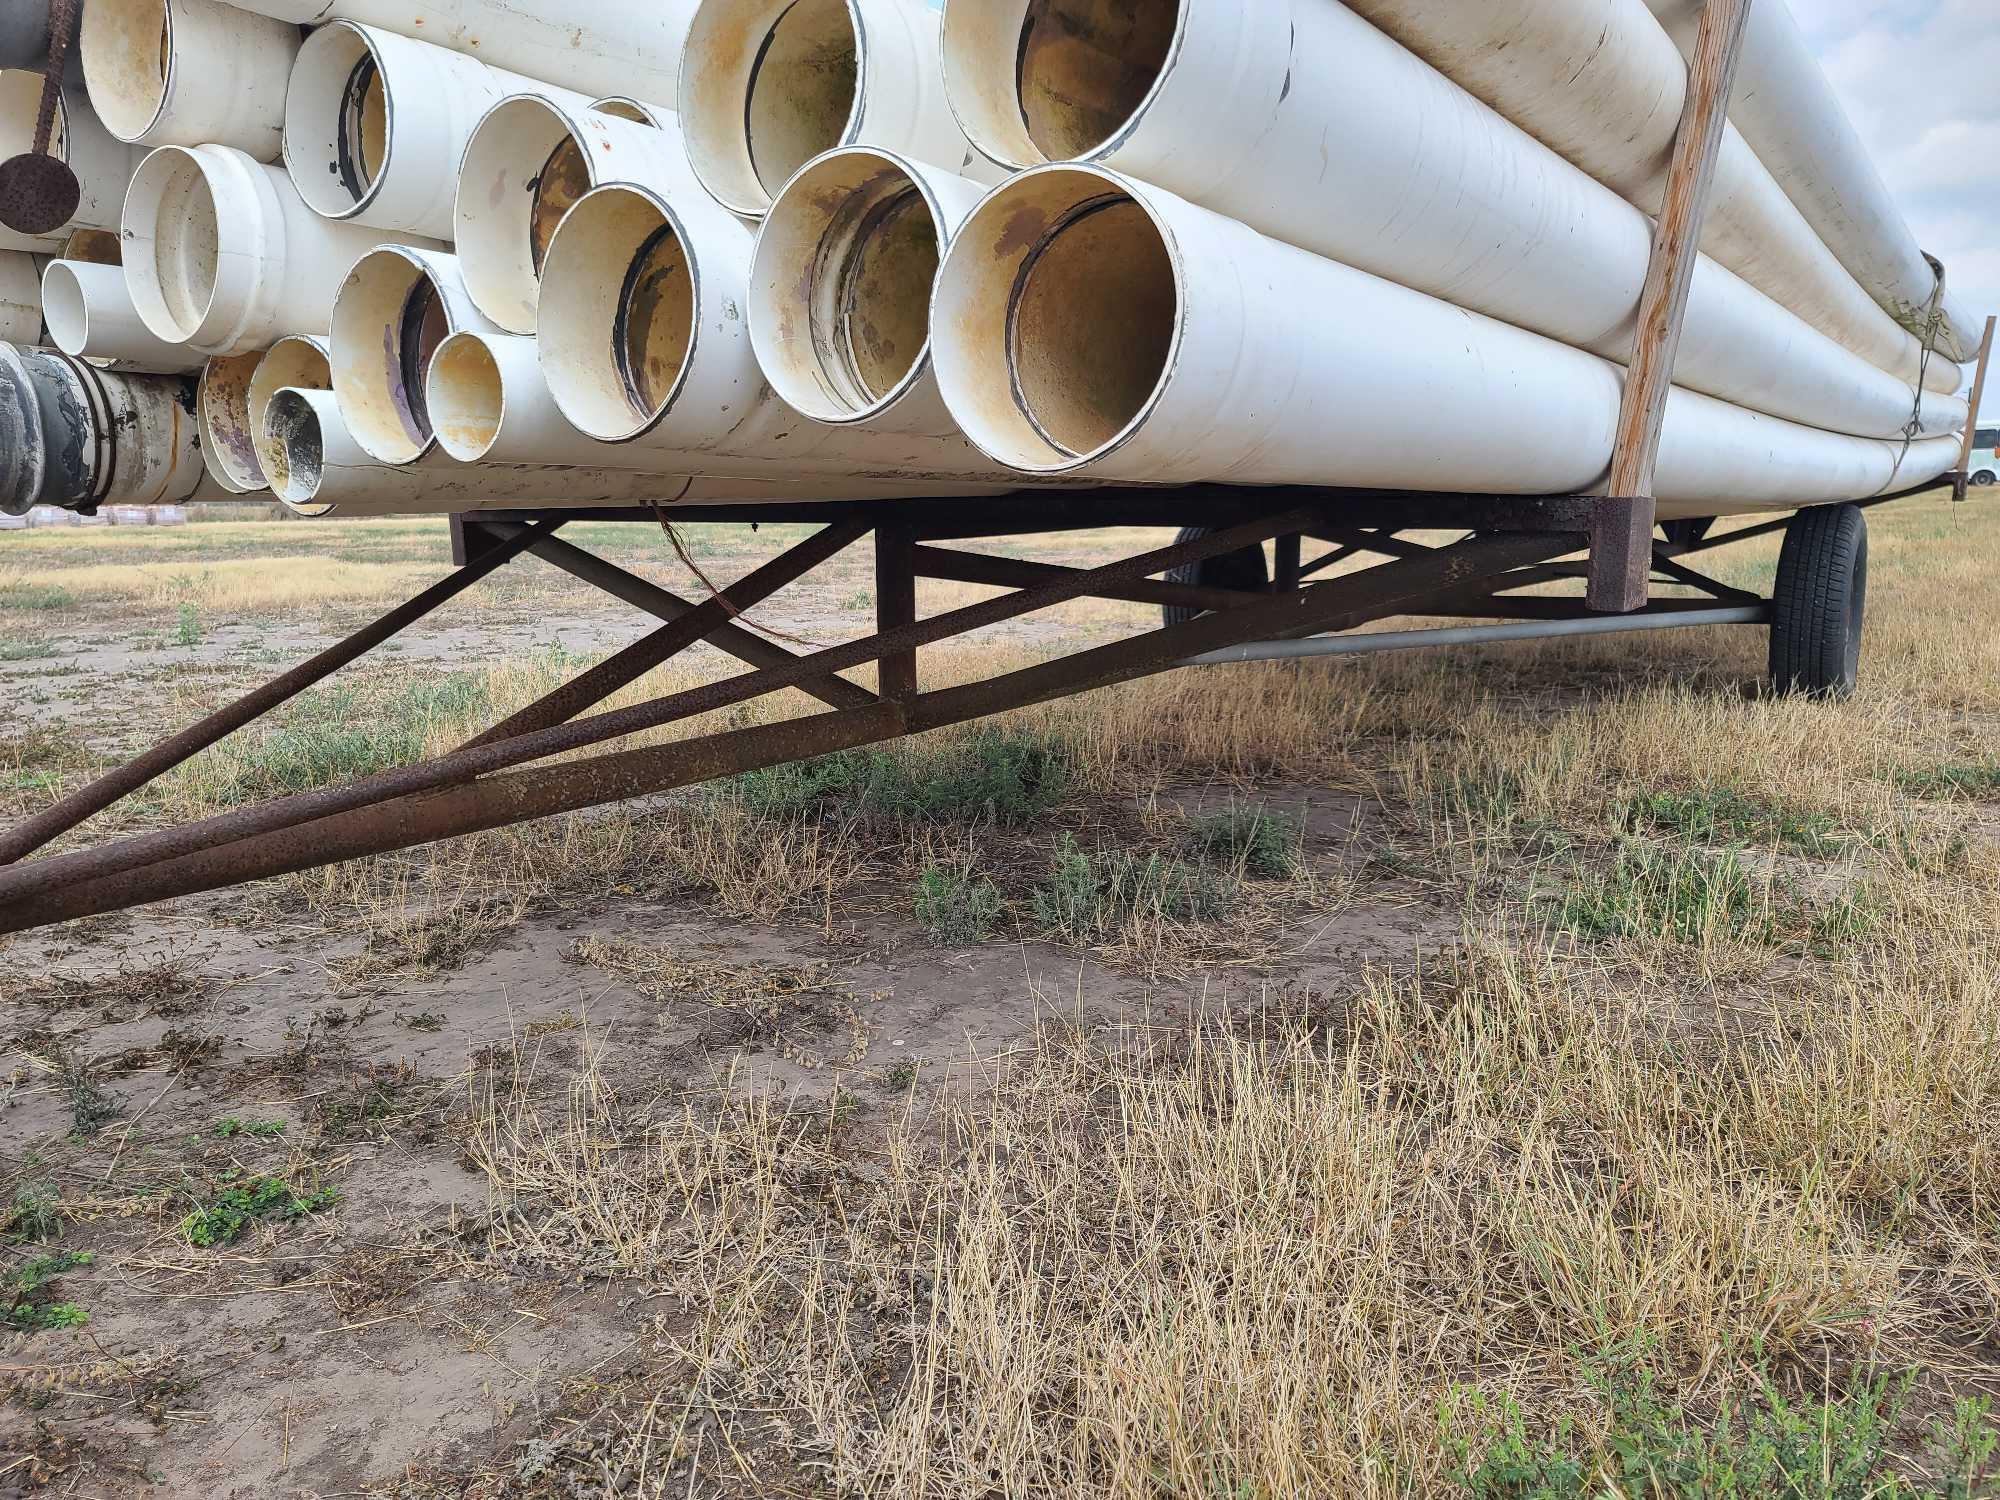 Group of PVC Irrigation Pipes on Trailer